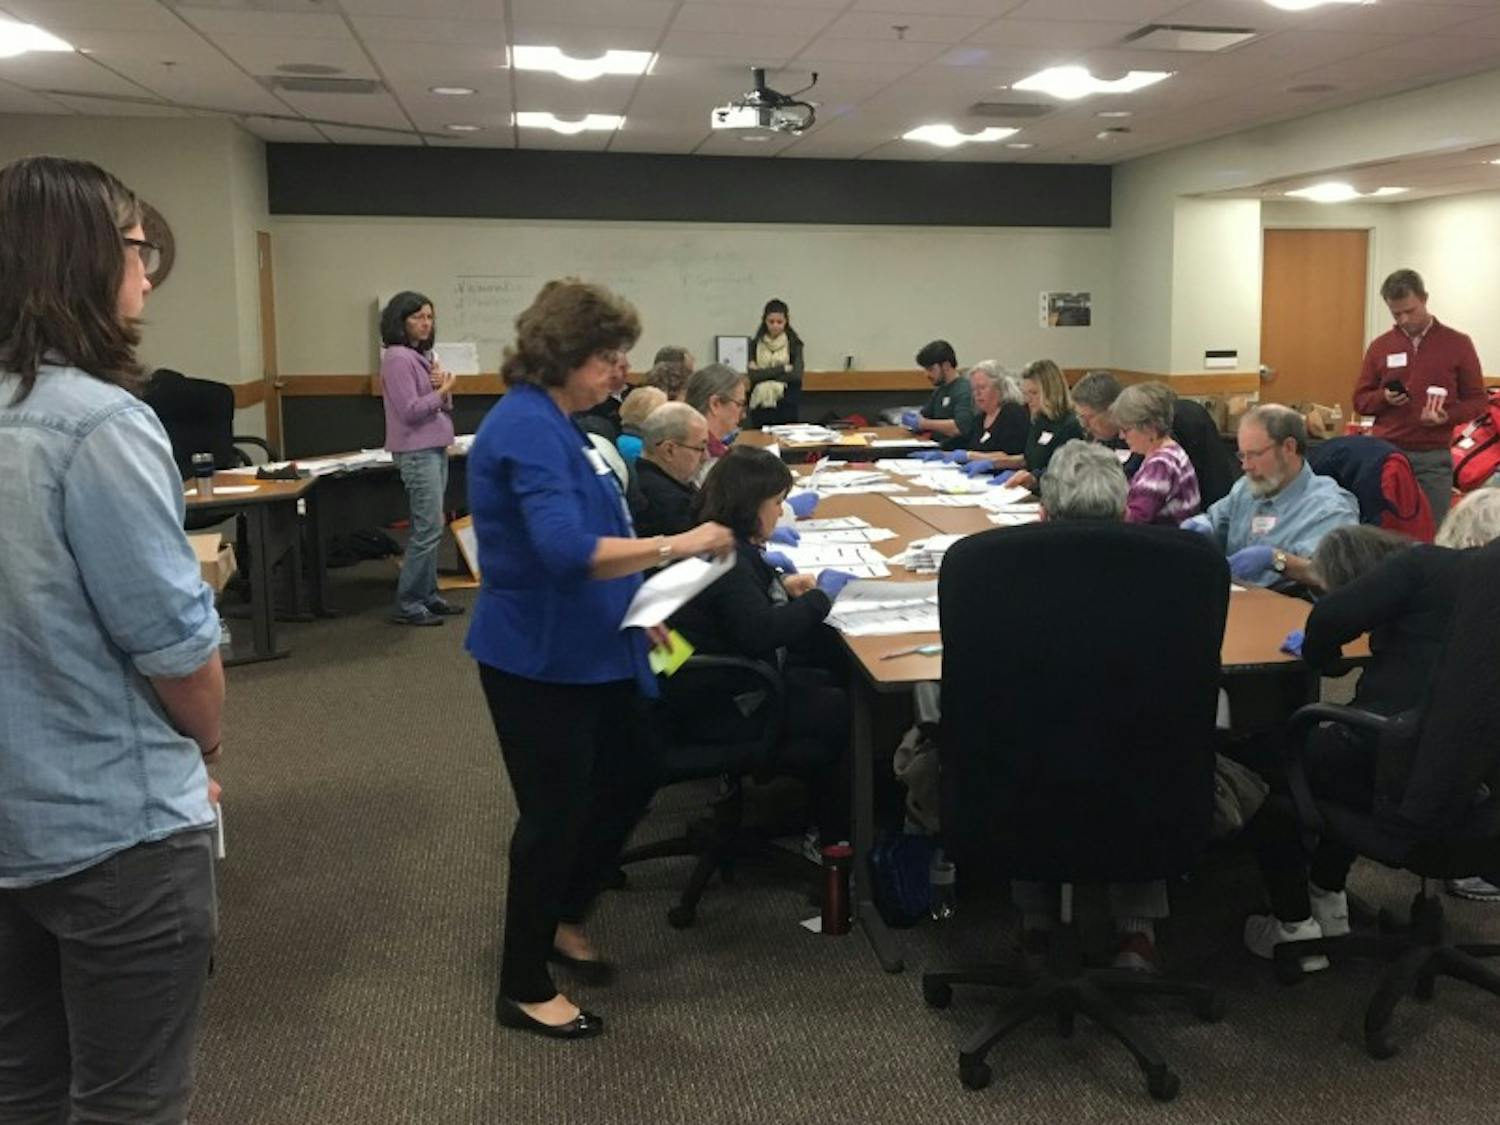 County clerk offices statewide are beginning a recount of Wisconsin’s general election results.